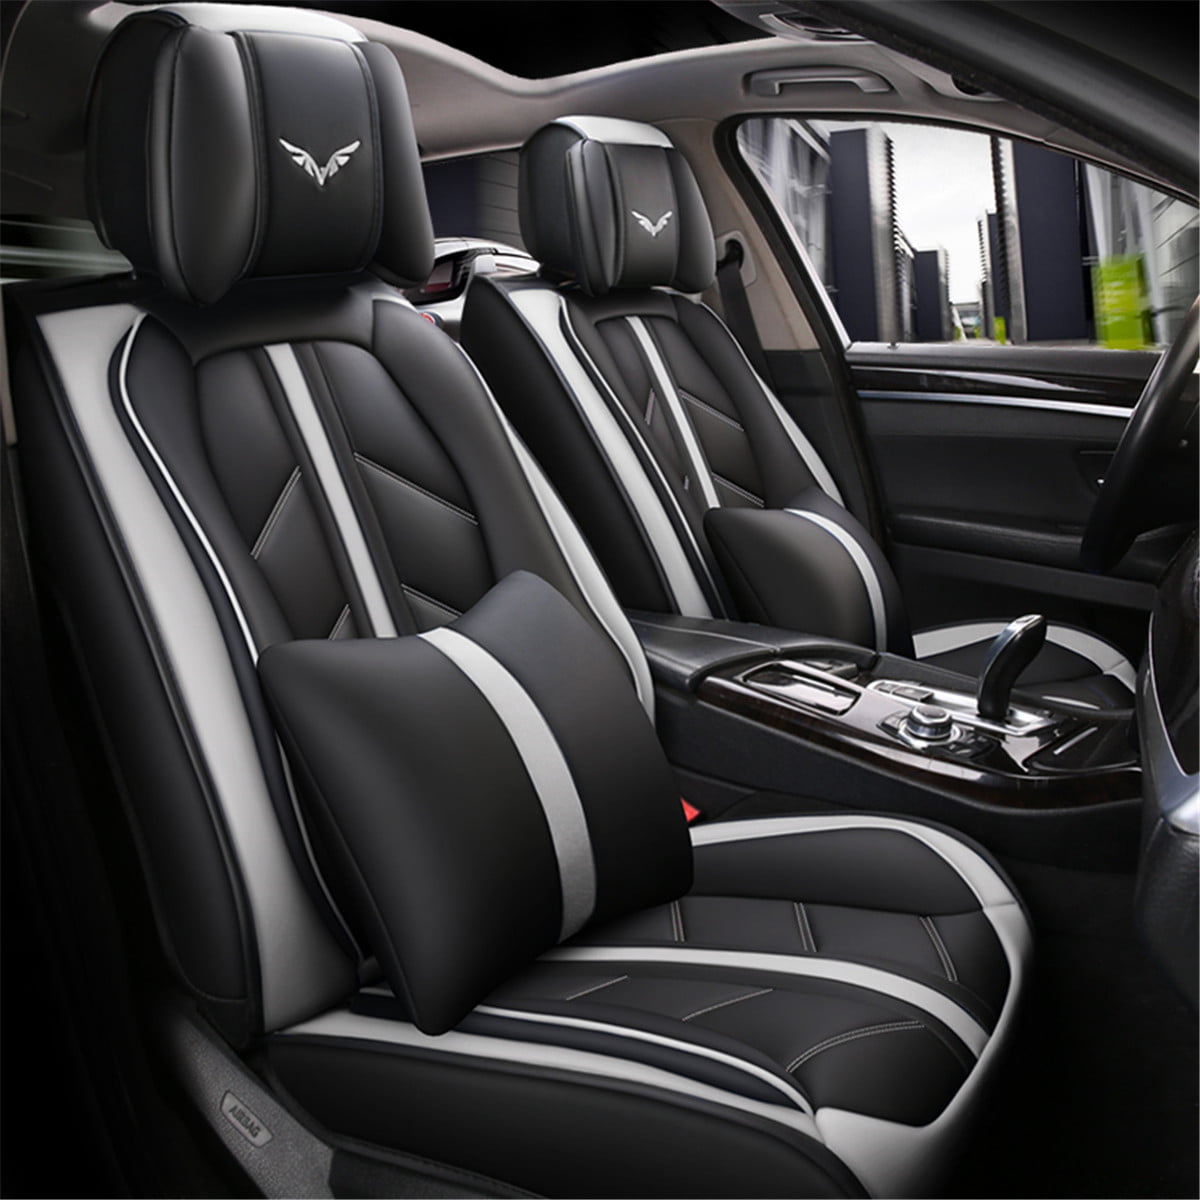 Auto Car Seat Covers Full Set 5 Seats Luxury PU Leather Airbag Compatible for Most car,SUV,Van,6D Model Design Black&Red